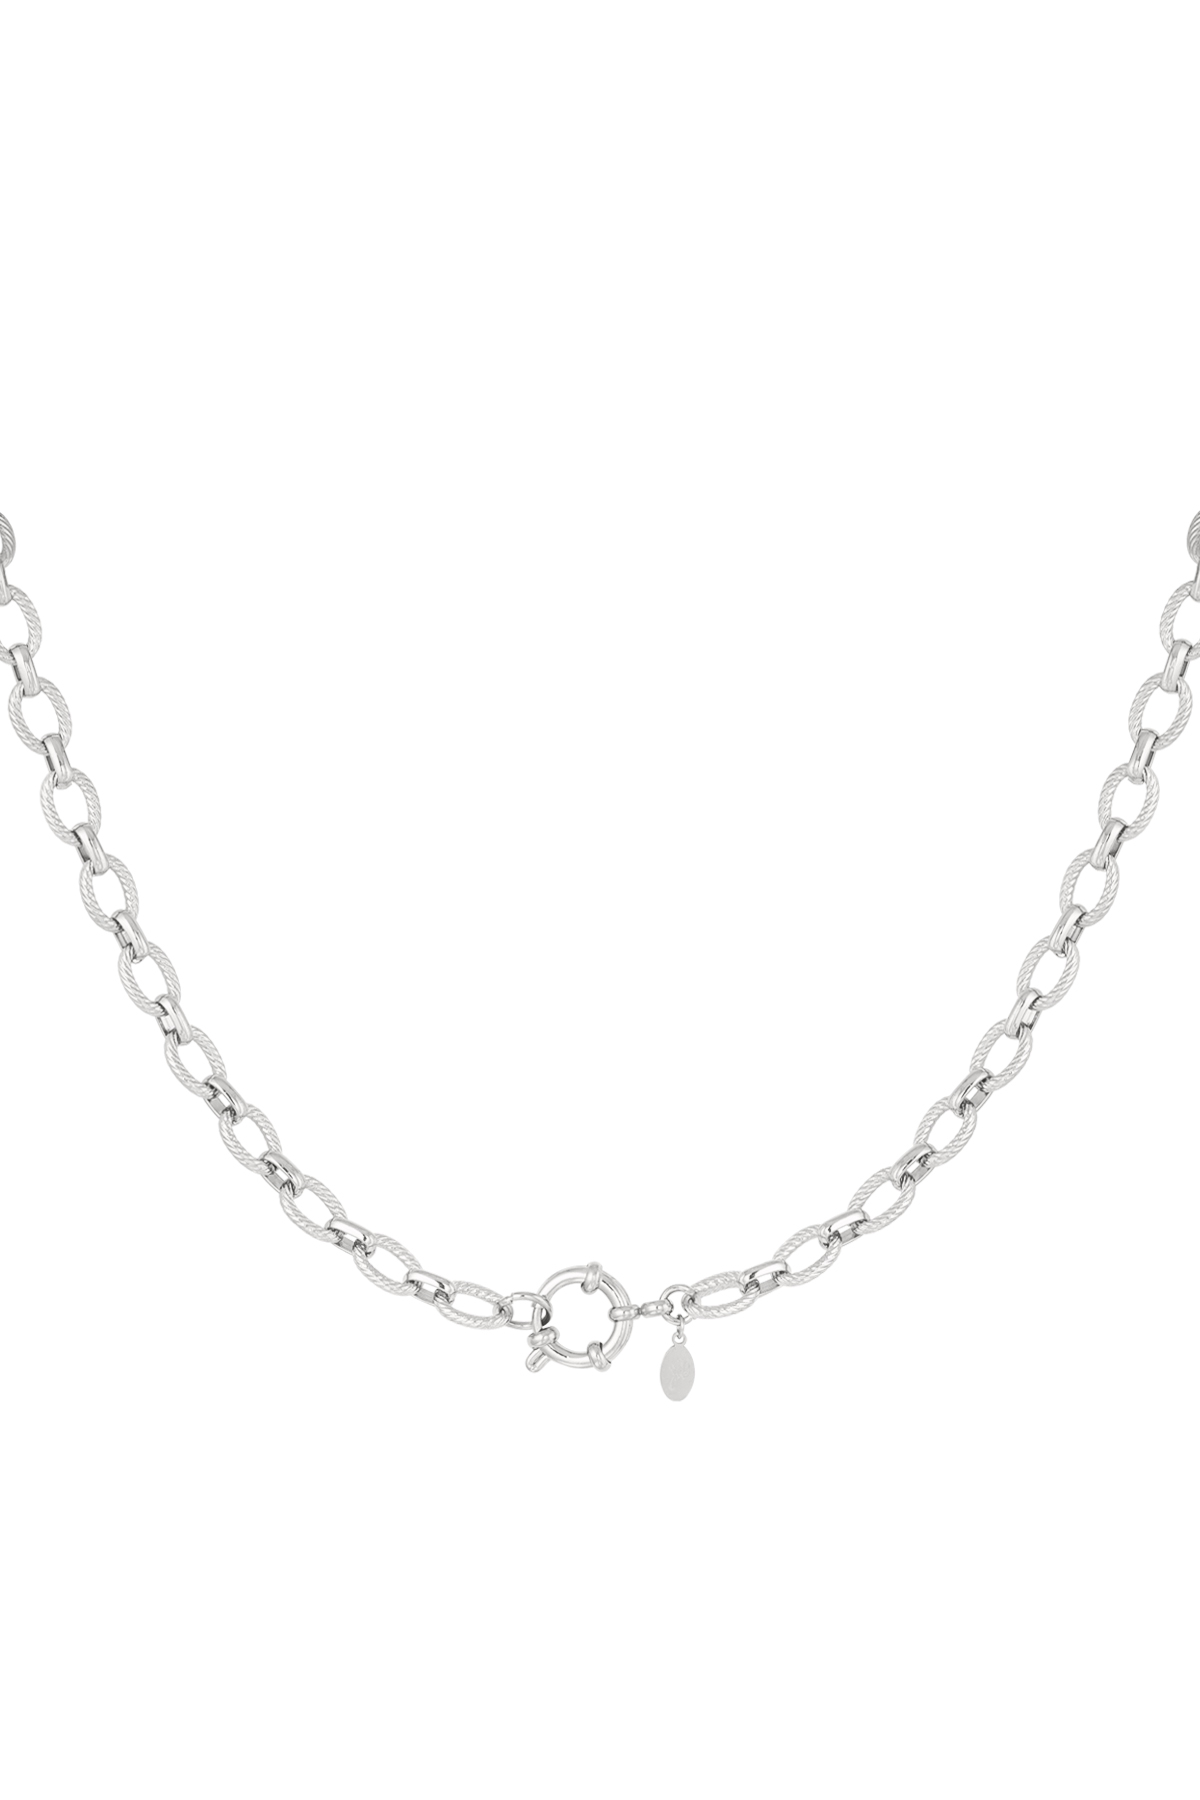 Necklace round links - silver